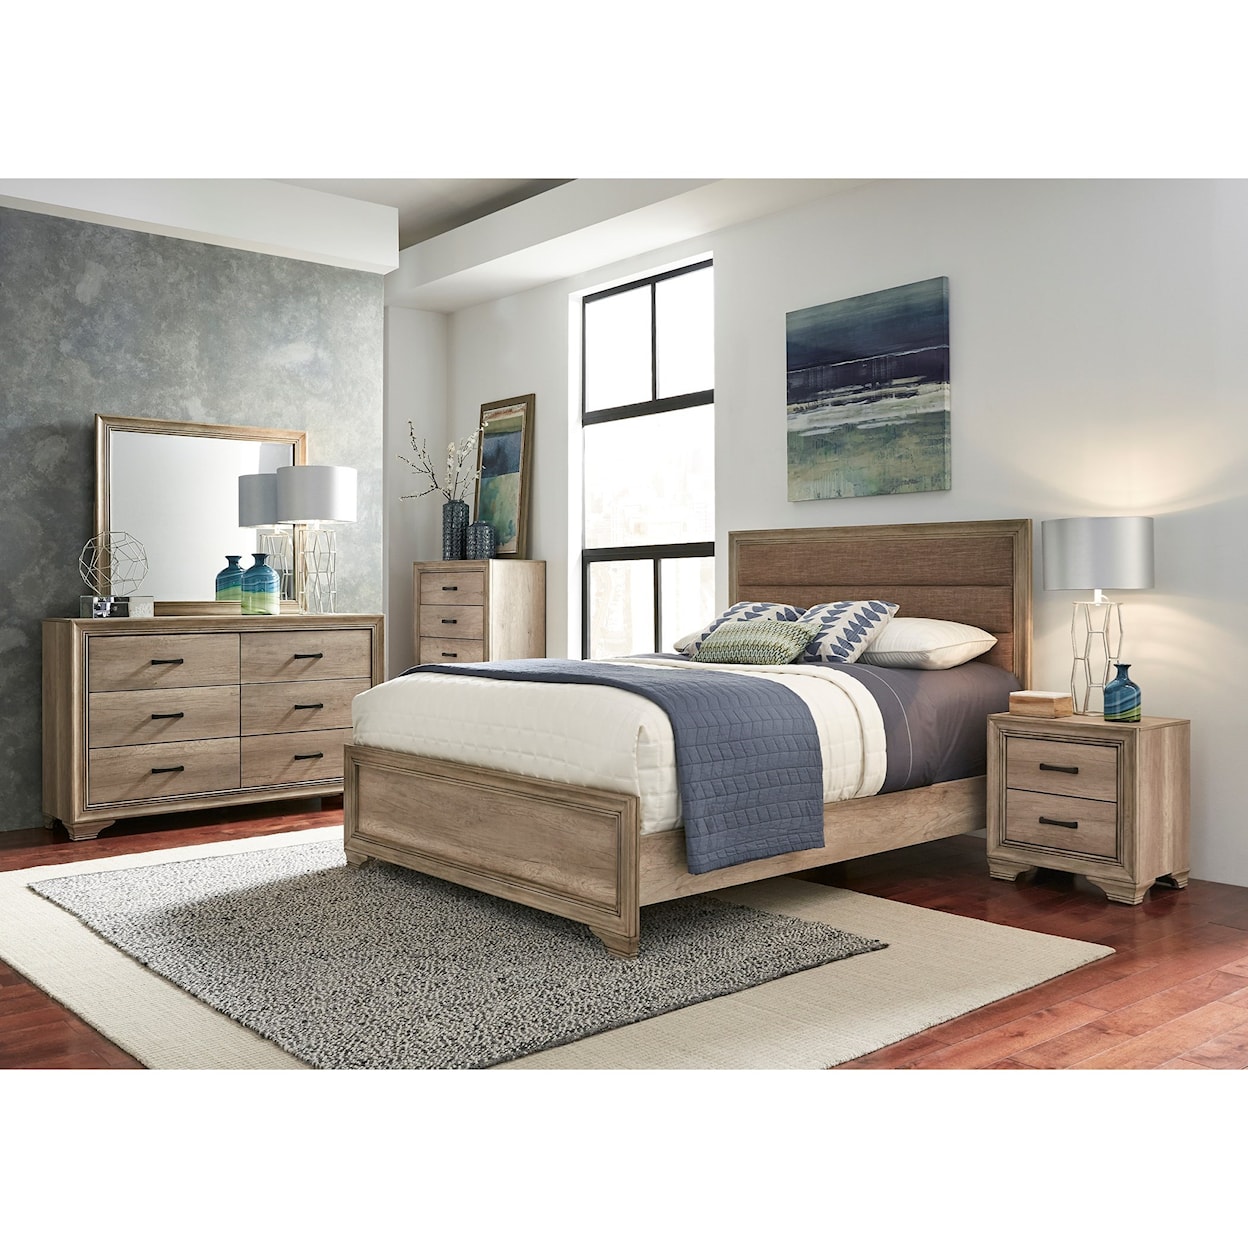 Liberty Furniture Sun Valley King Upholstered Panel Bed